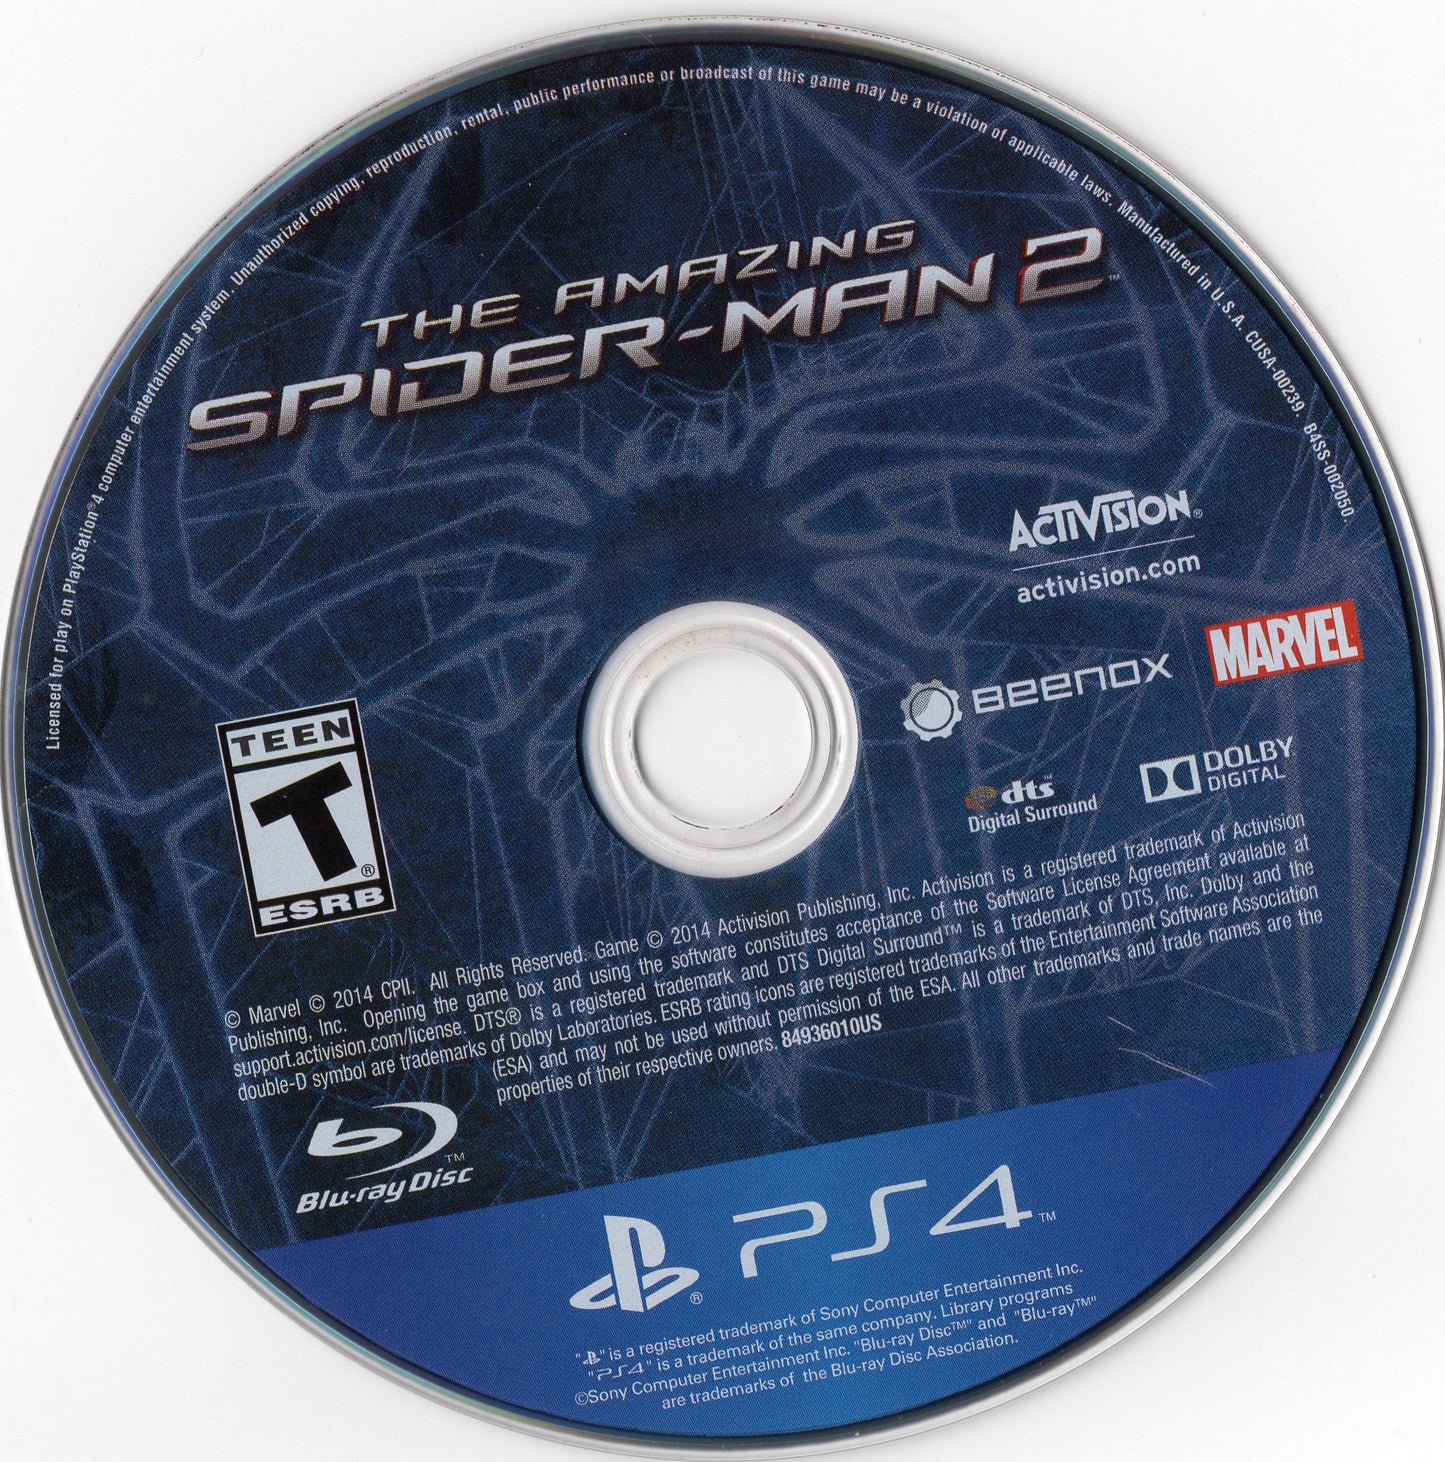 PS4 The Amazing Spider-Man 2 (2014)